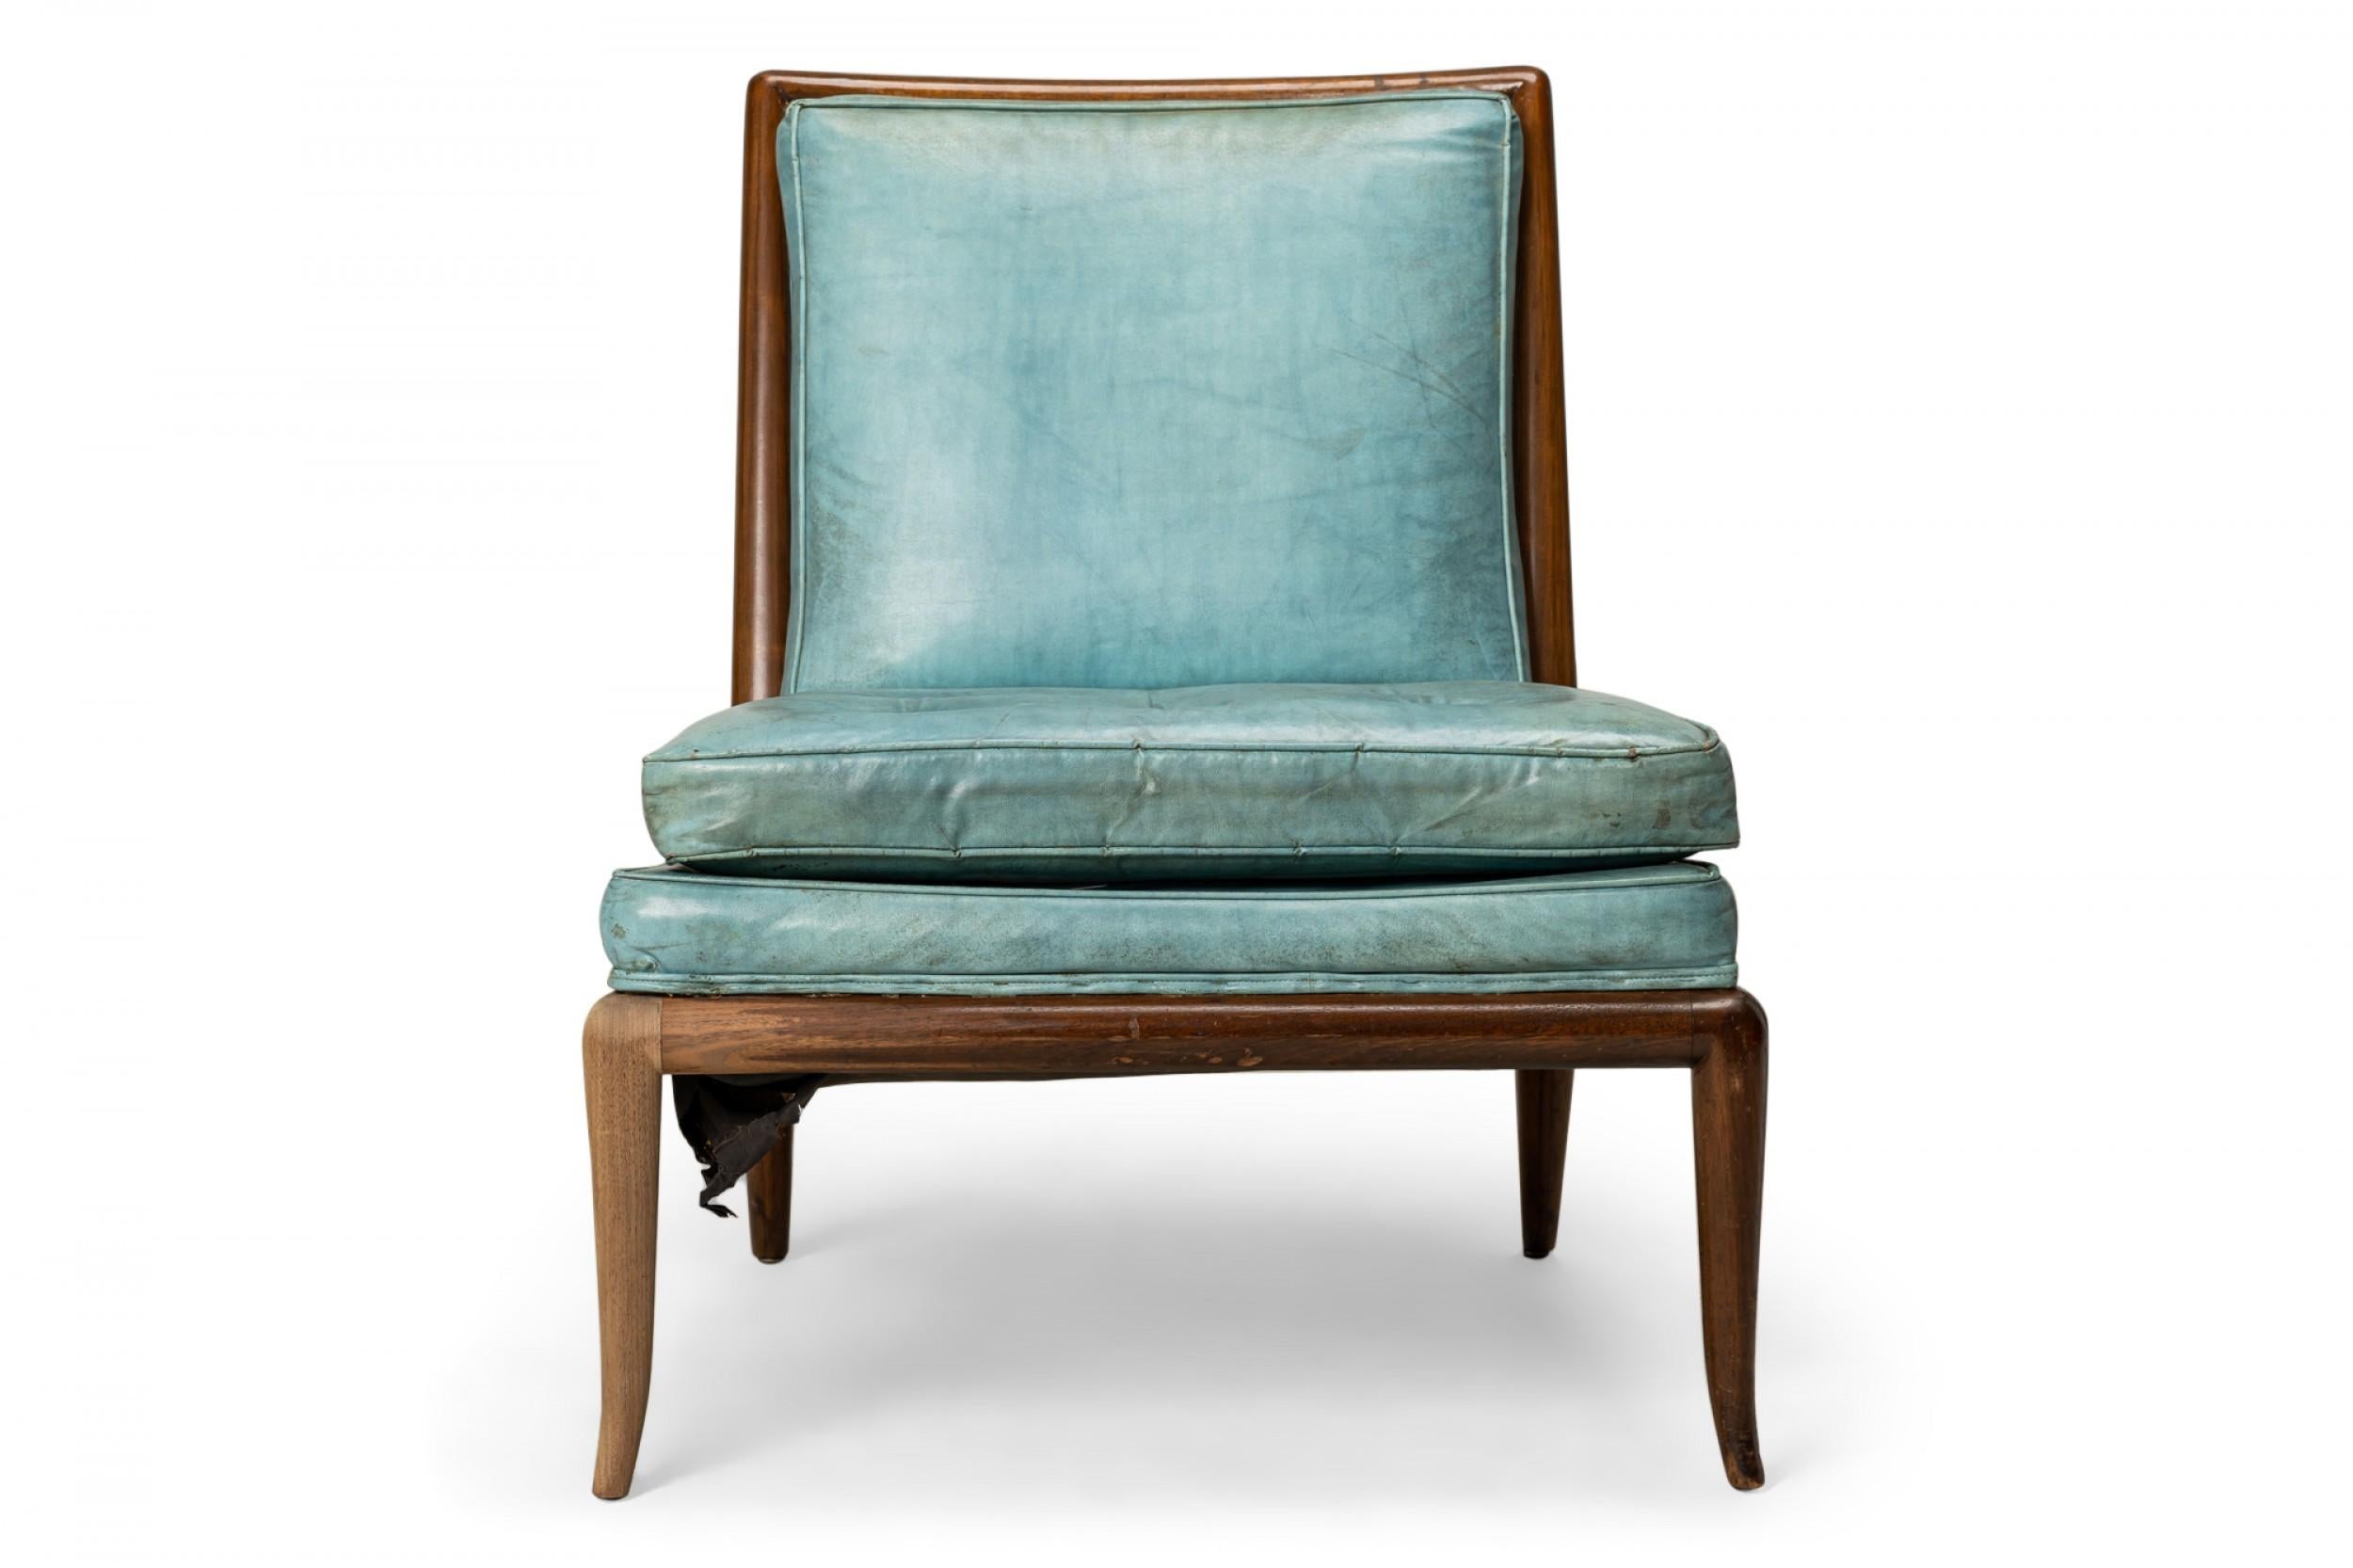 American Mid-Century slipper chair with a square walnut frame, upholstered in powder blue leather with a button-tufted seat cushion, resting on four gently curved and tapered legs. (T.H. ROBSJOHN-GIBBINGS FOR WIDDICOMB FURNITURE COMPANY)(Similar